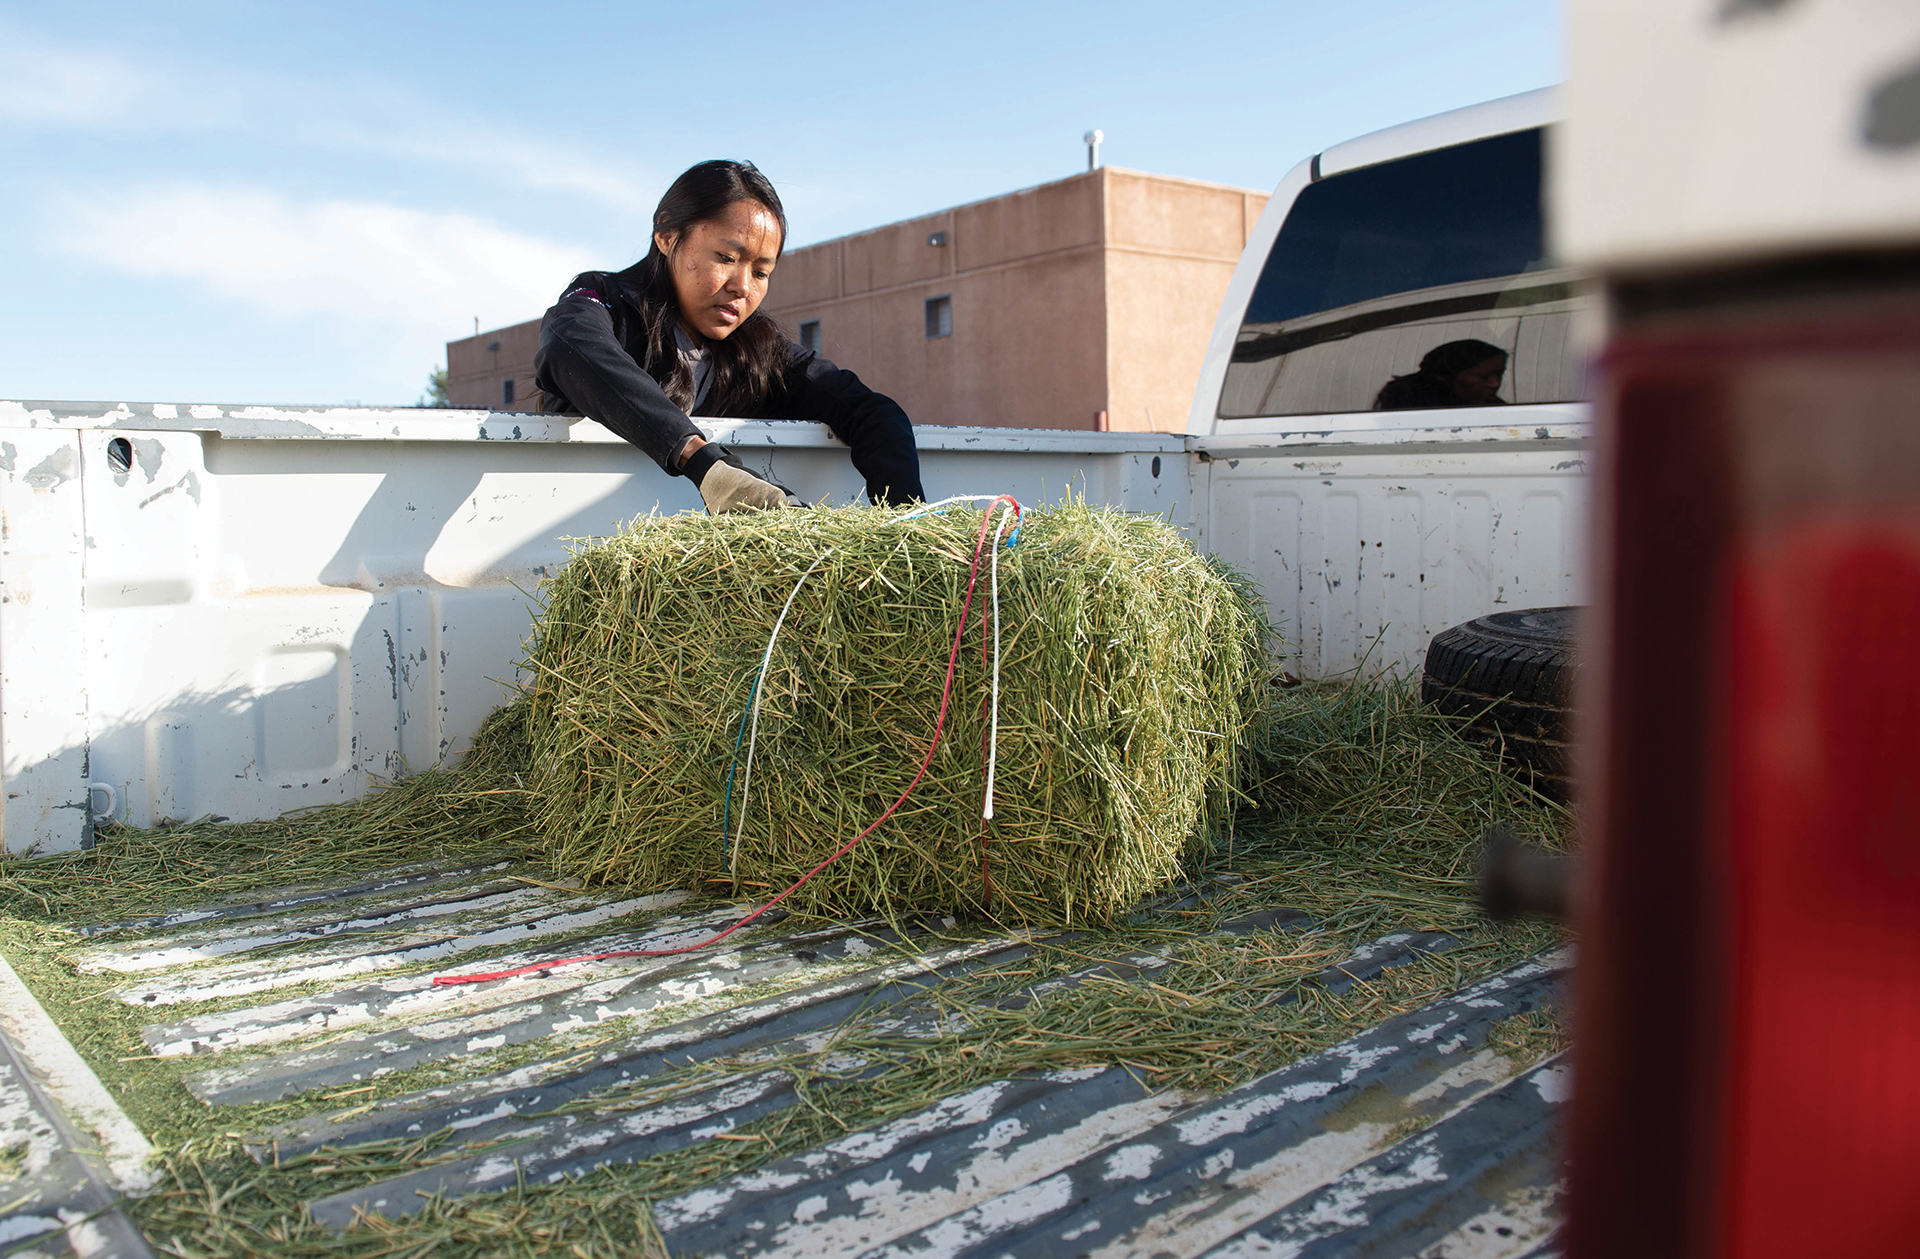 A woman grabbing hay from the bed of a truck